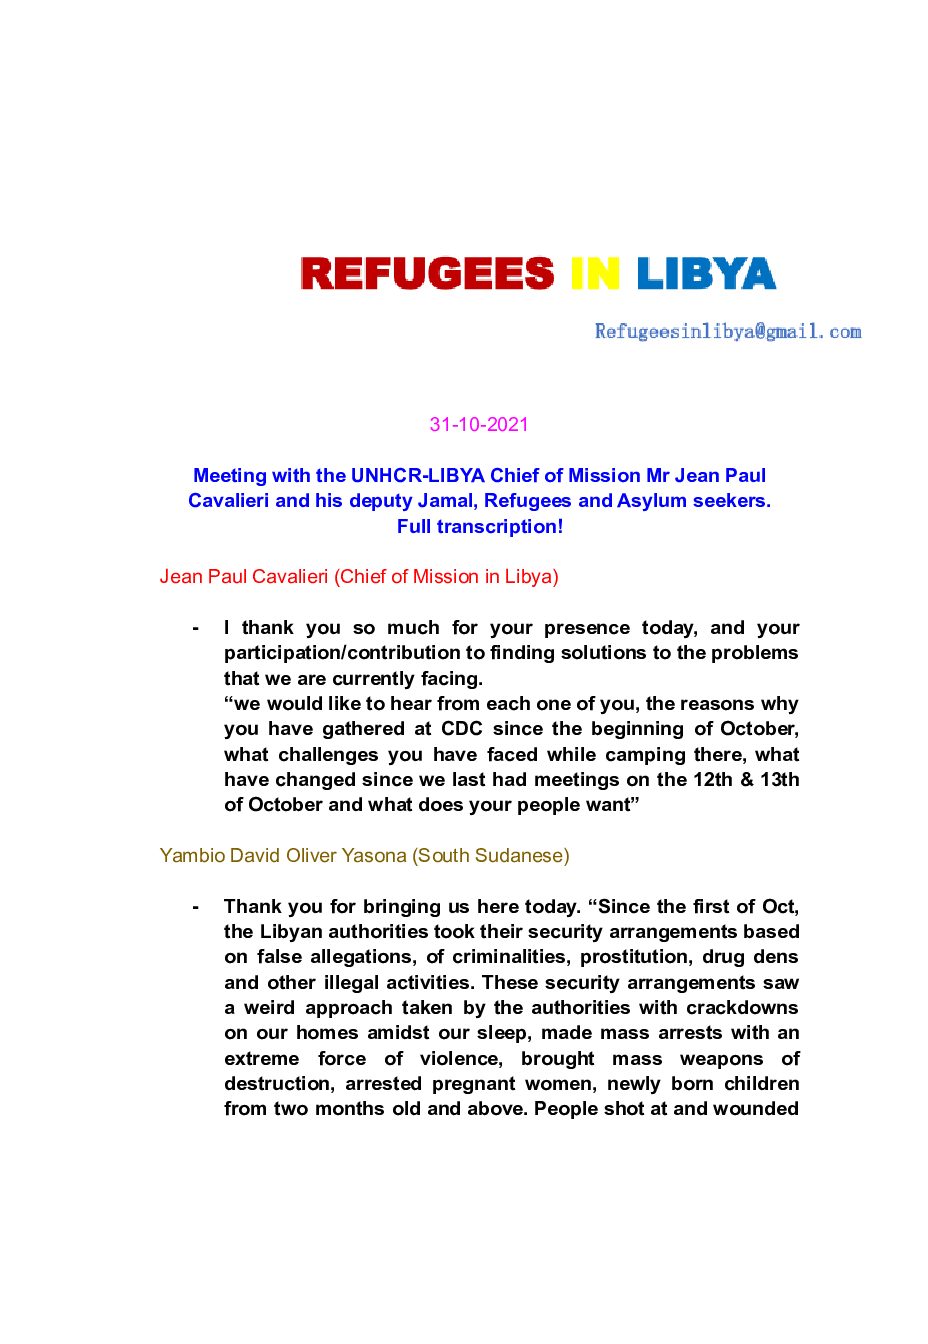 Refugees in Libya – Meeting with UNHCR 31.10.2021